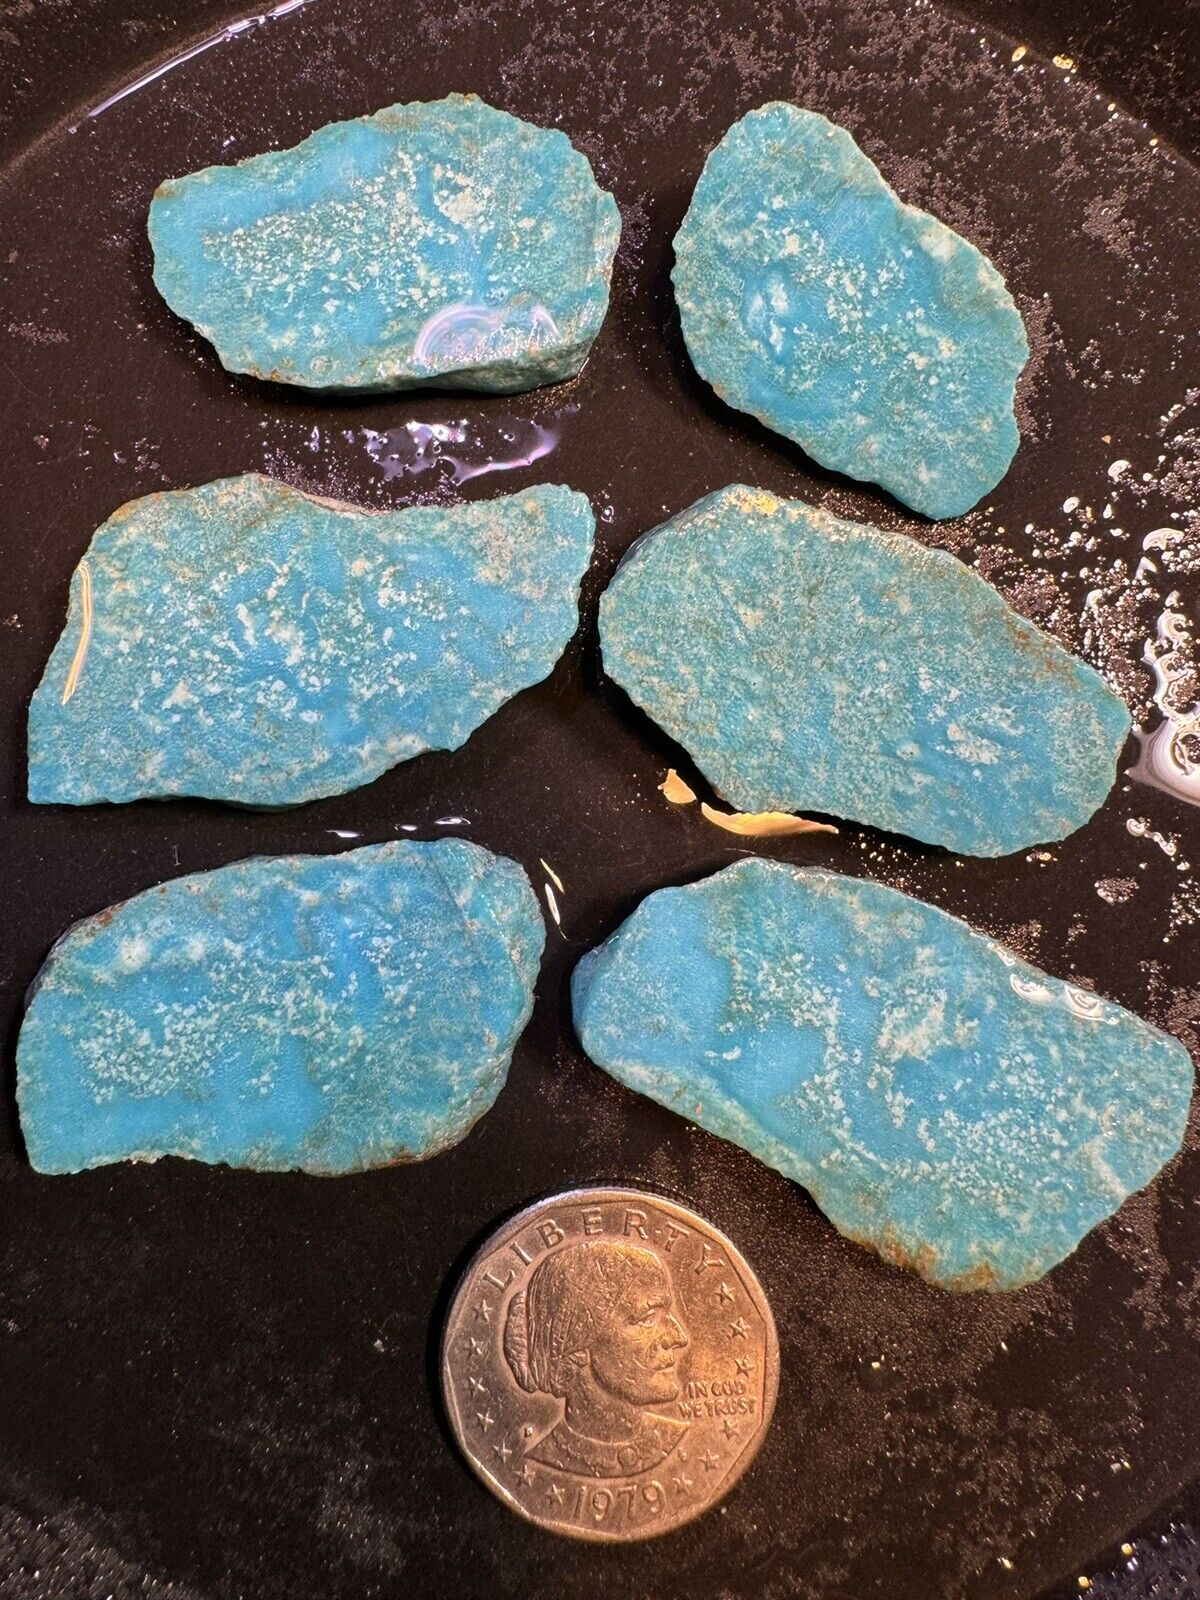 Turquoise Mountain Turquoise.  68g of slabs Get What You See FANCY BLUE SNOW